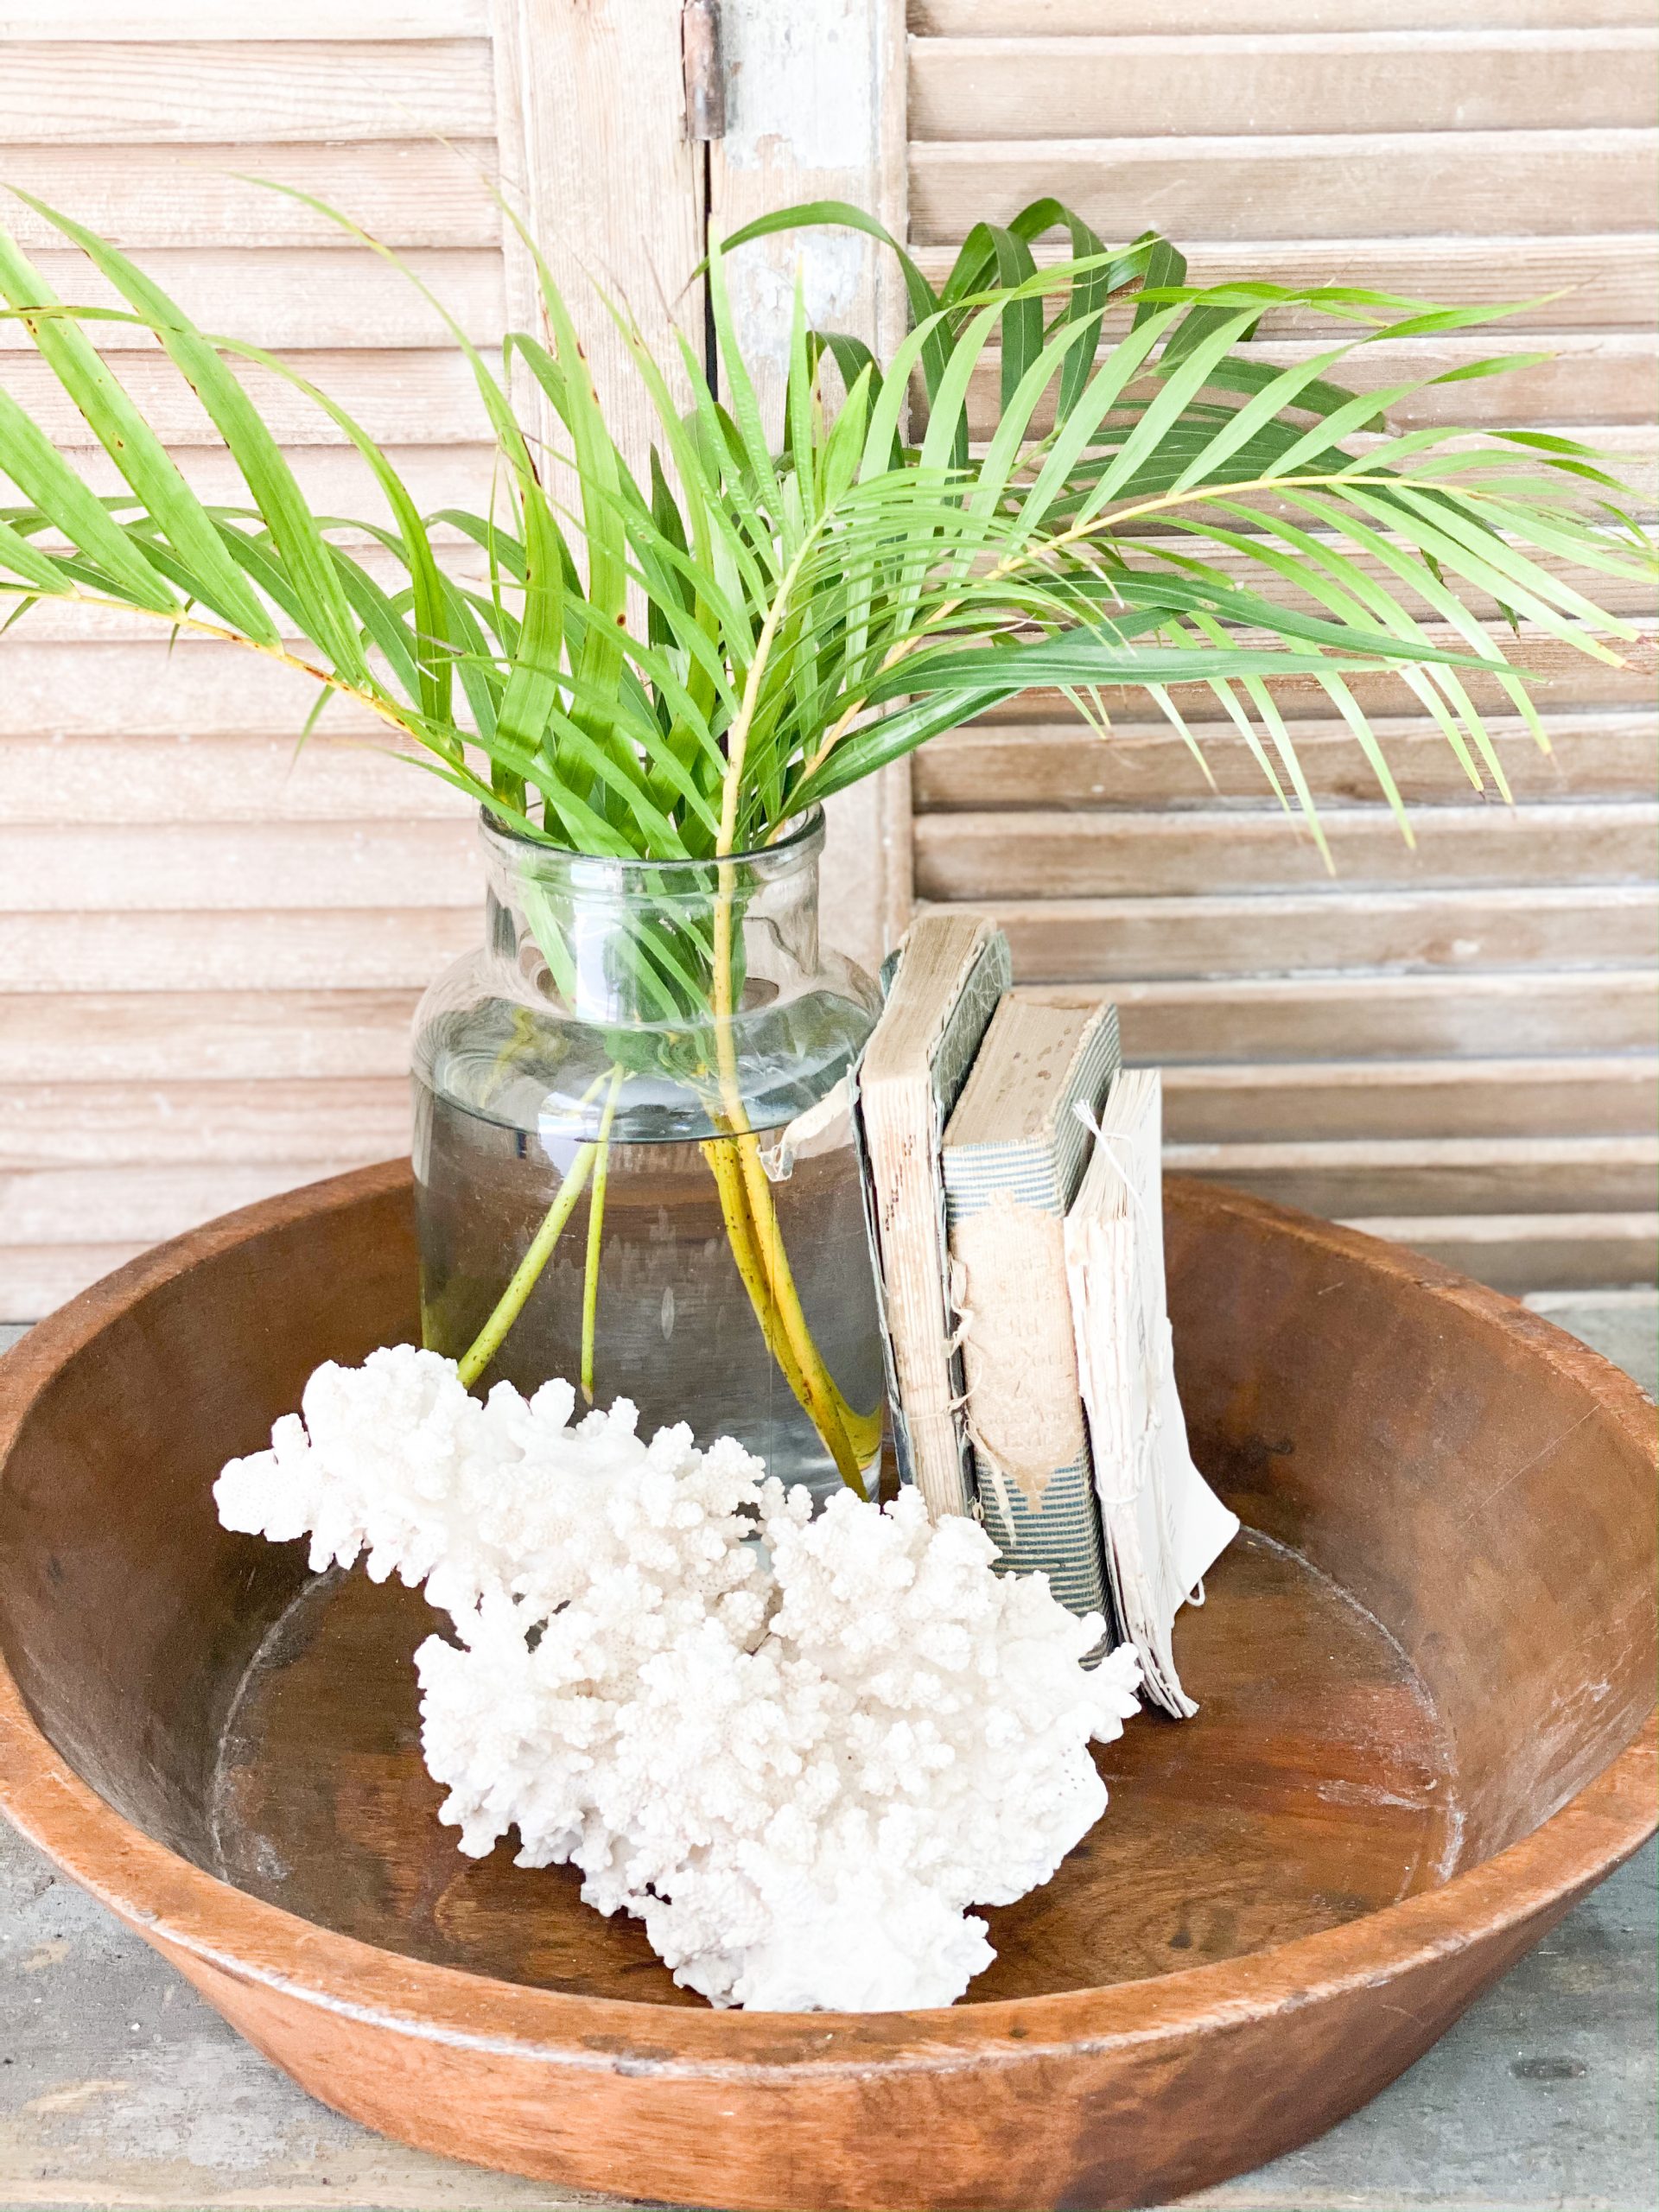 vignette in a dough bowl with palm leaves old books and coral